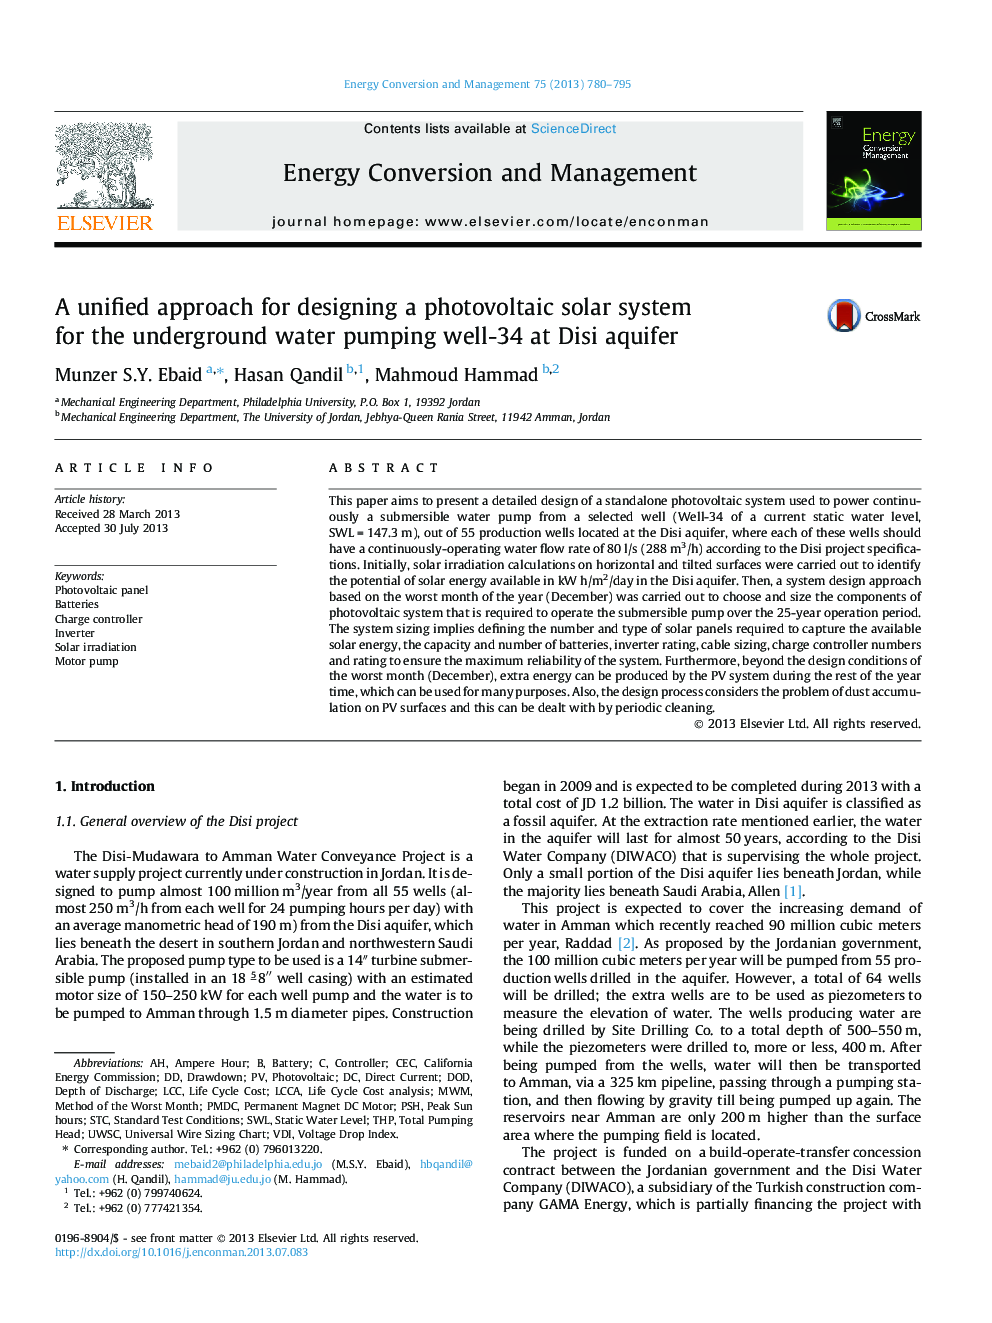 A unified approach for designing a photovoltaic solar system for the underground water pumping well-34 at Disi aquifer